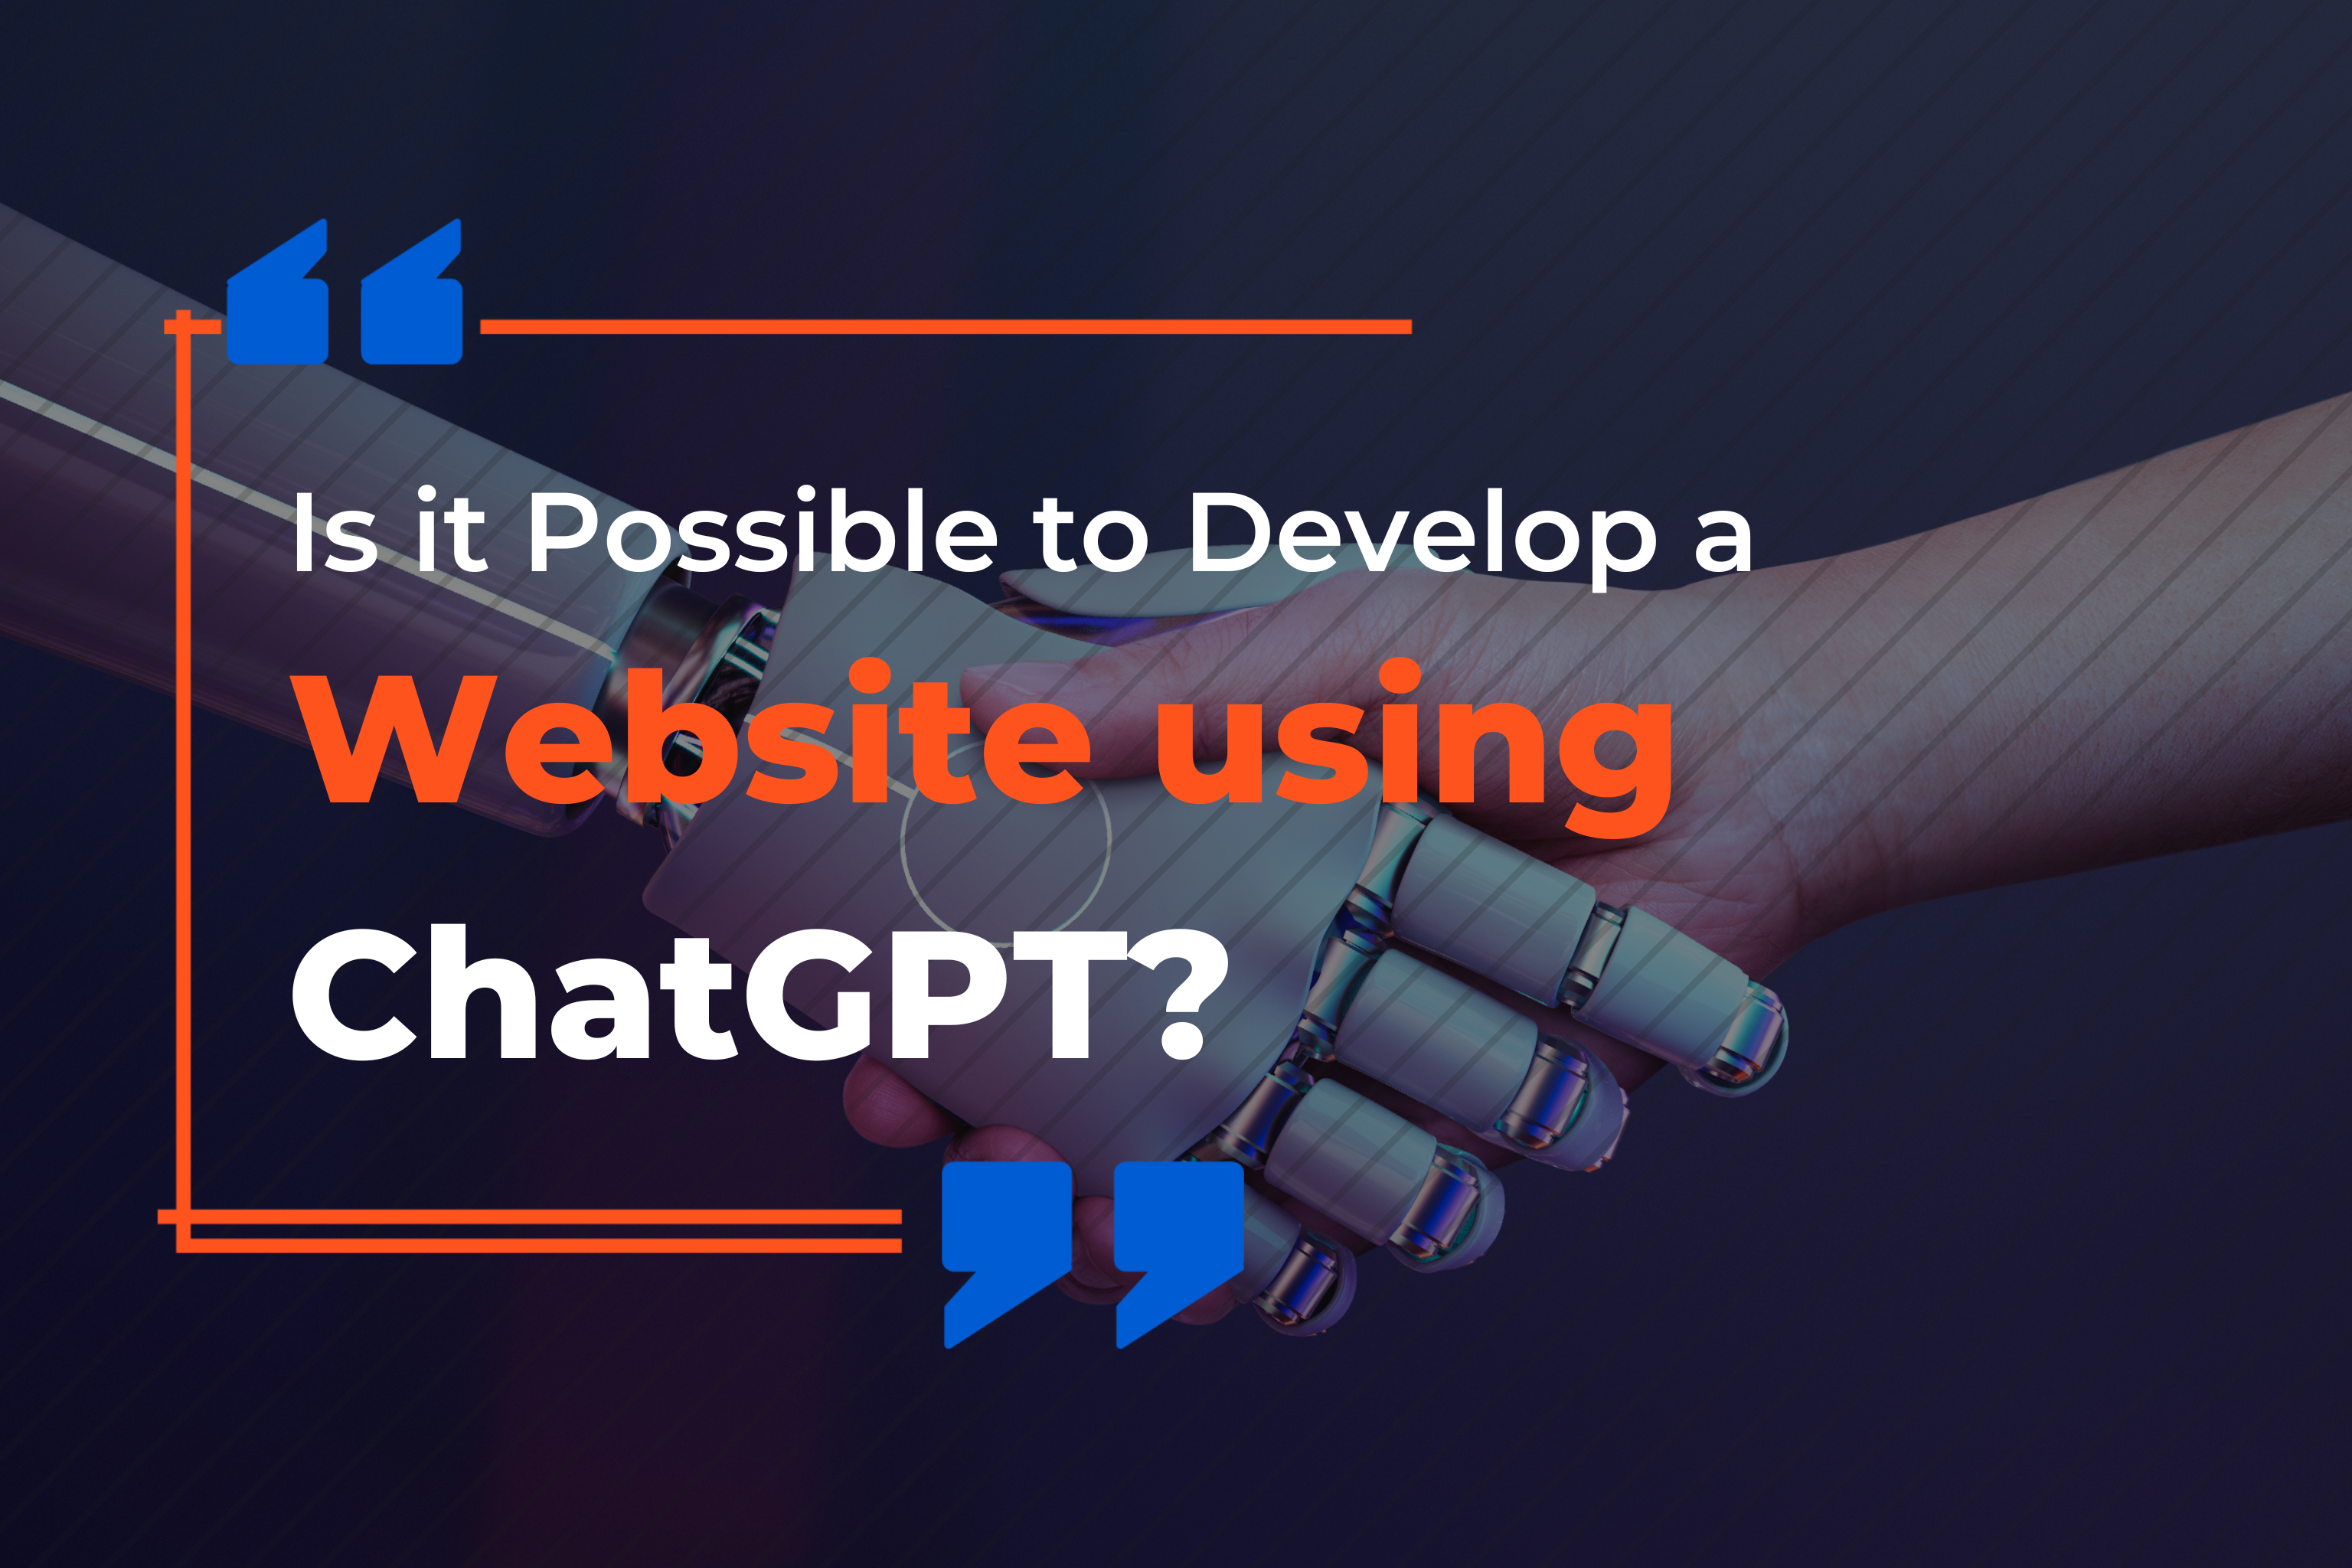 Is it Possible to Develop a Website using ChatGPT?